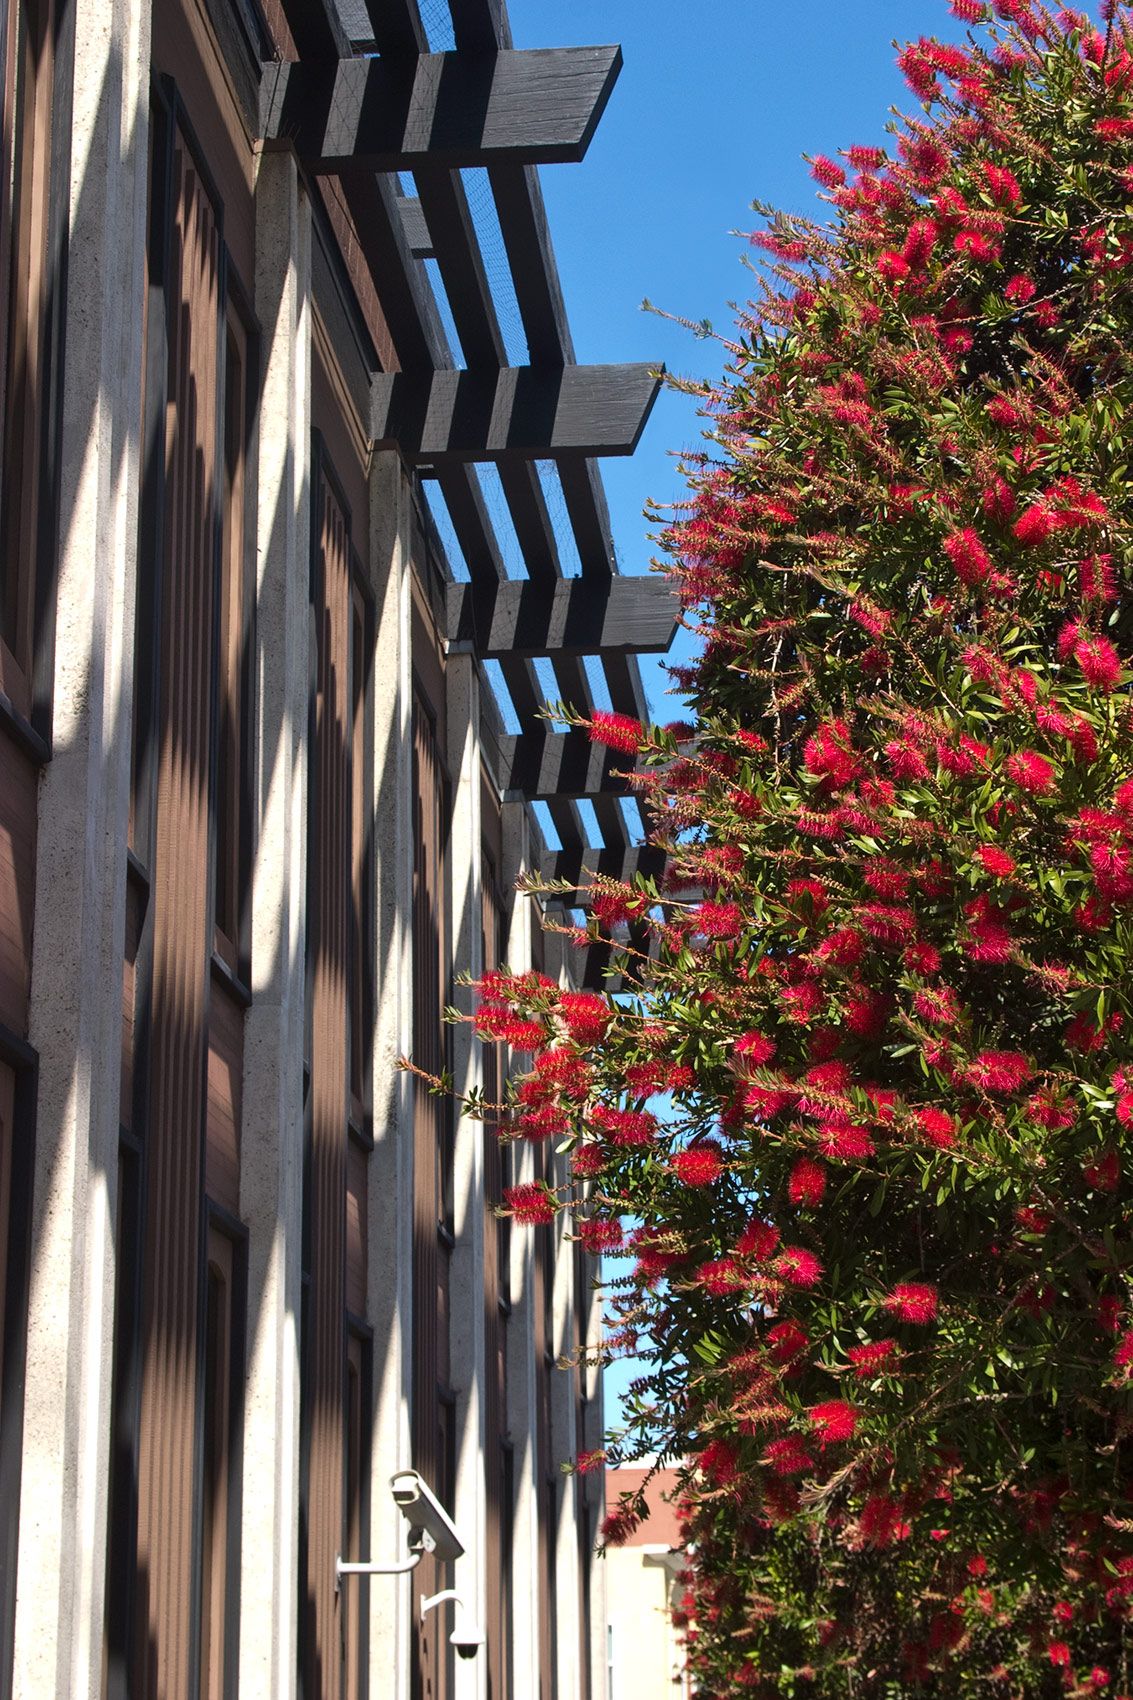 Pergola building with red flowers, San Francisco, CA